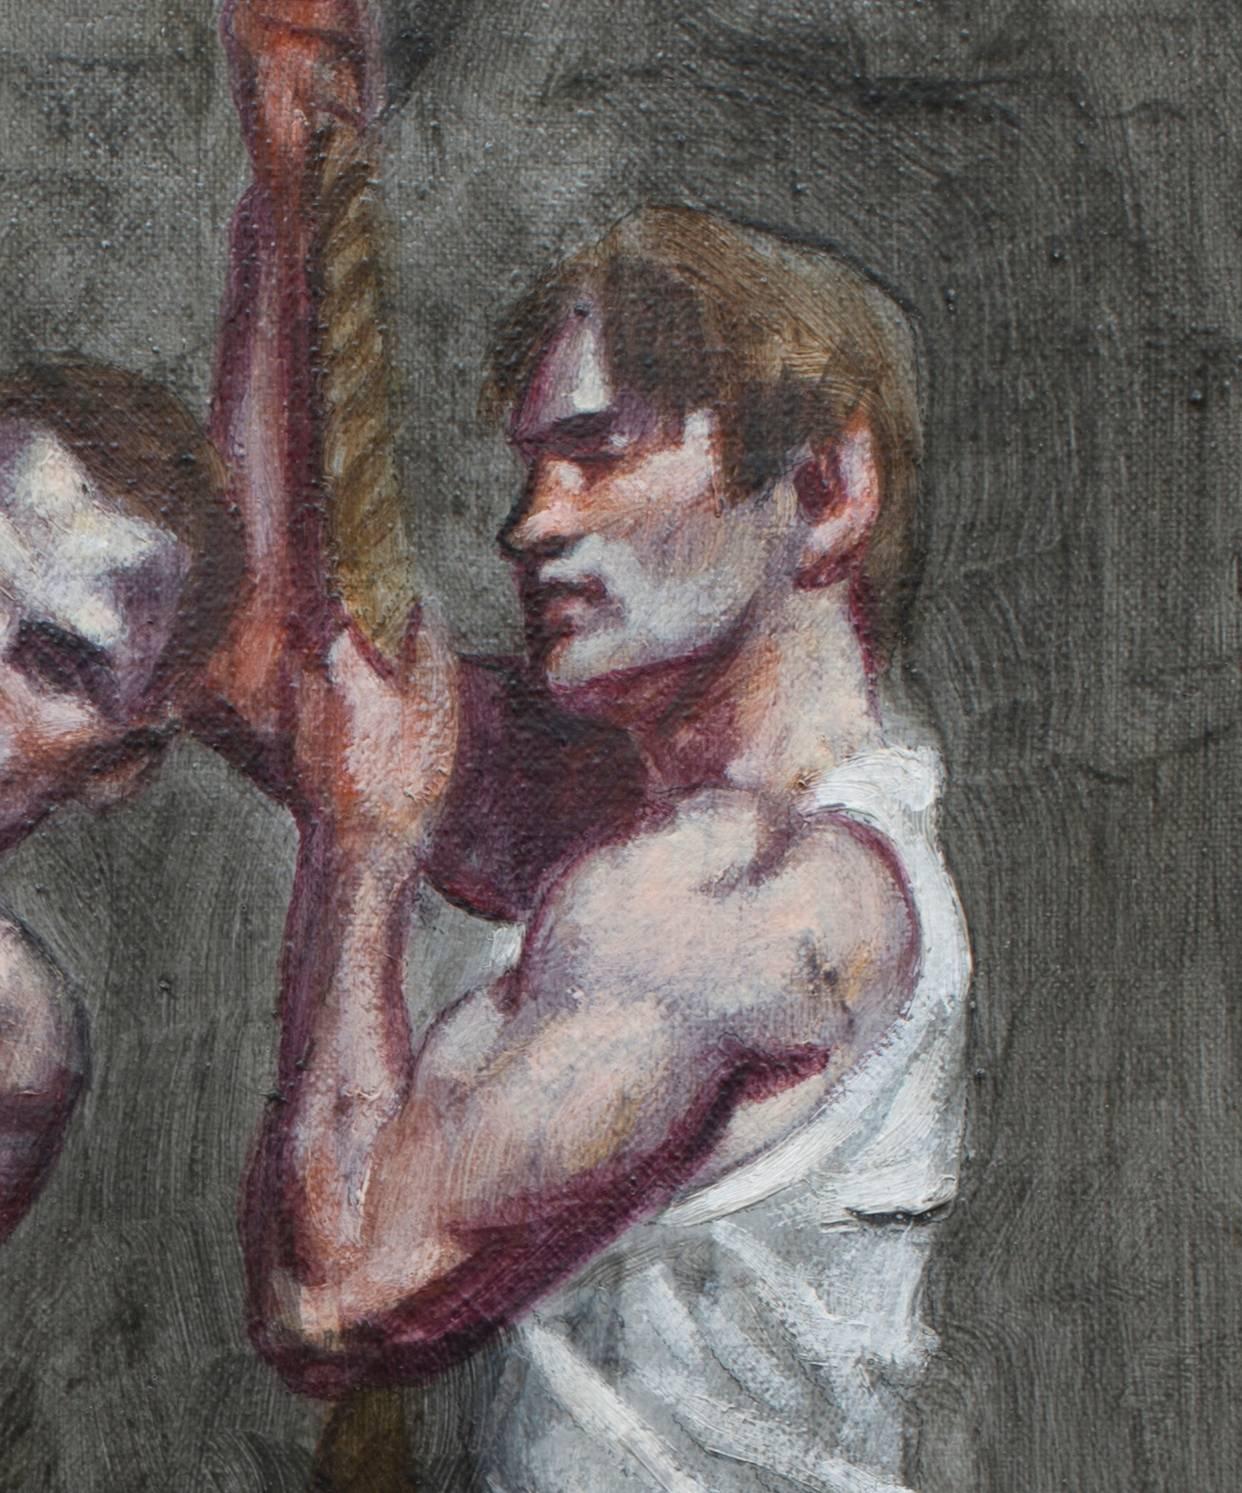 Two Boys Climbing Rope (Oil Painting of 2 Male Athletes) - Black Figurative Painting by Mark Beard